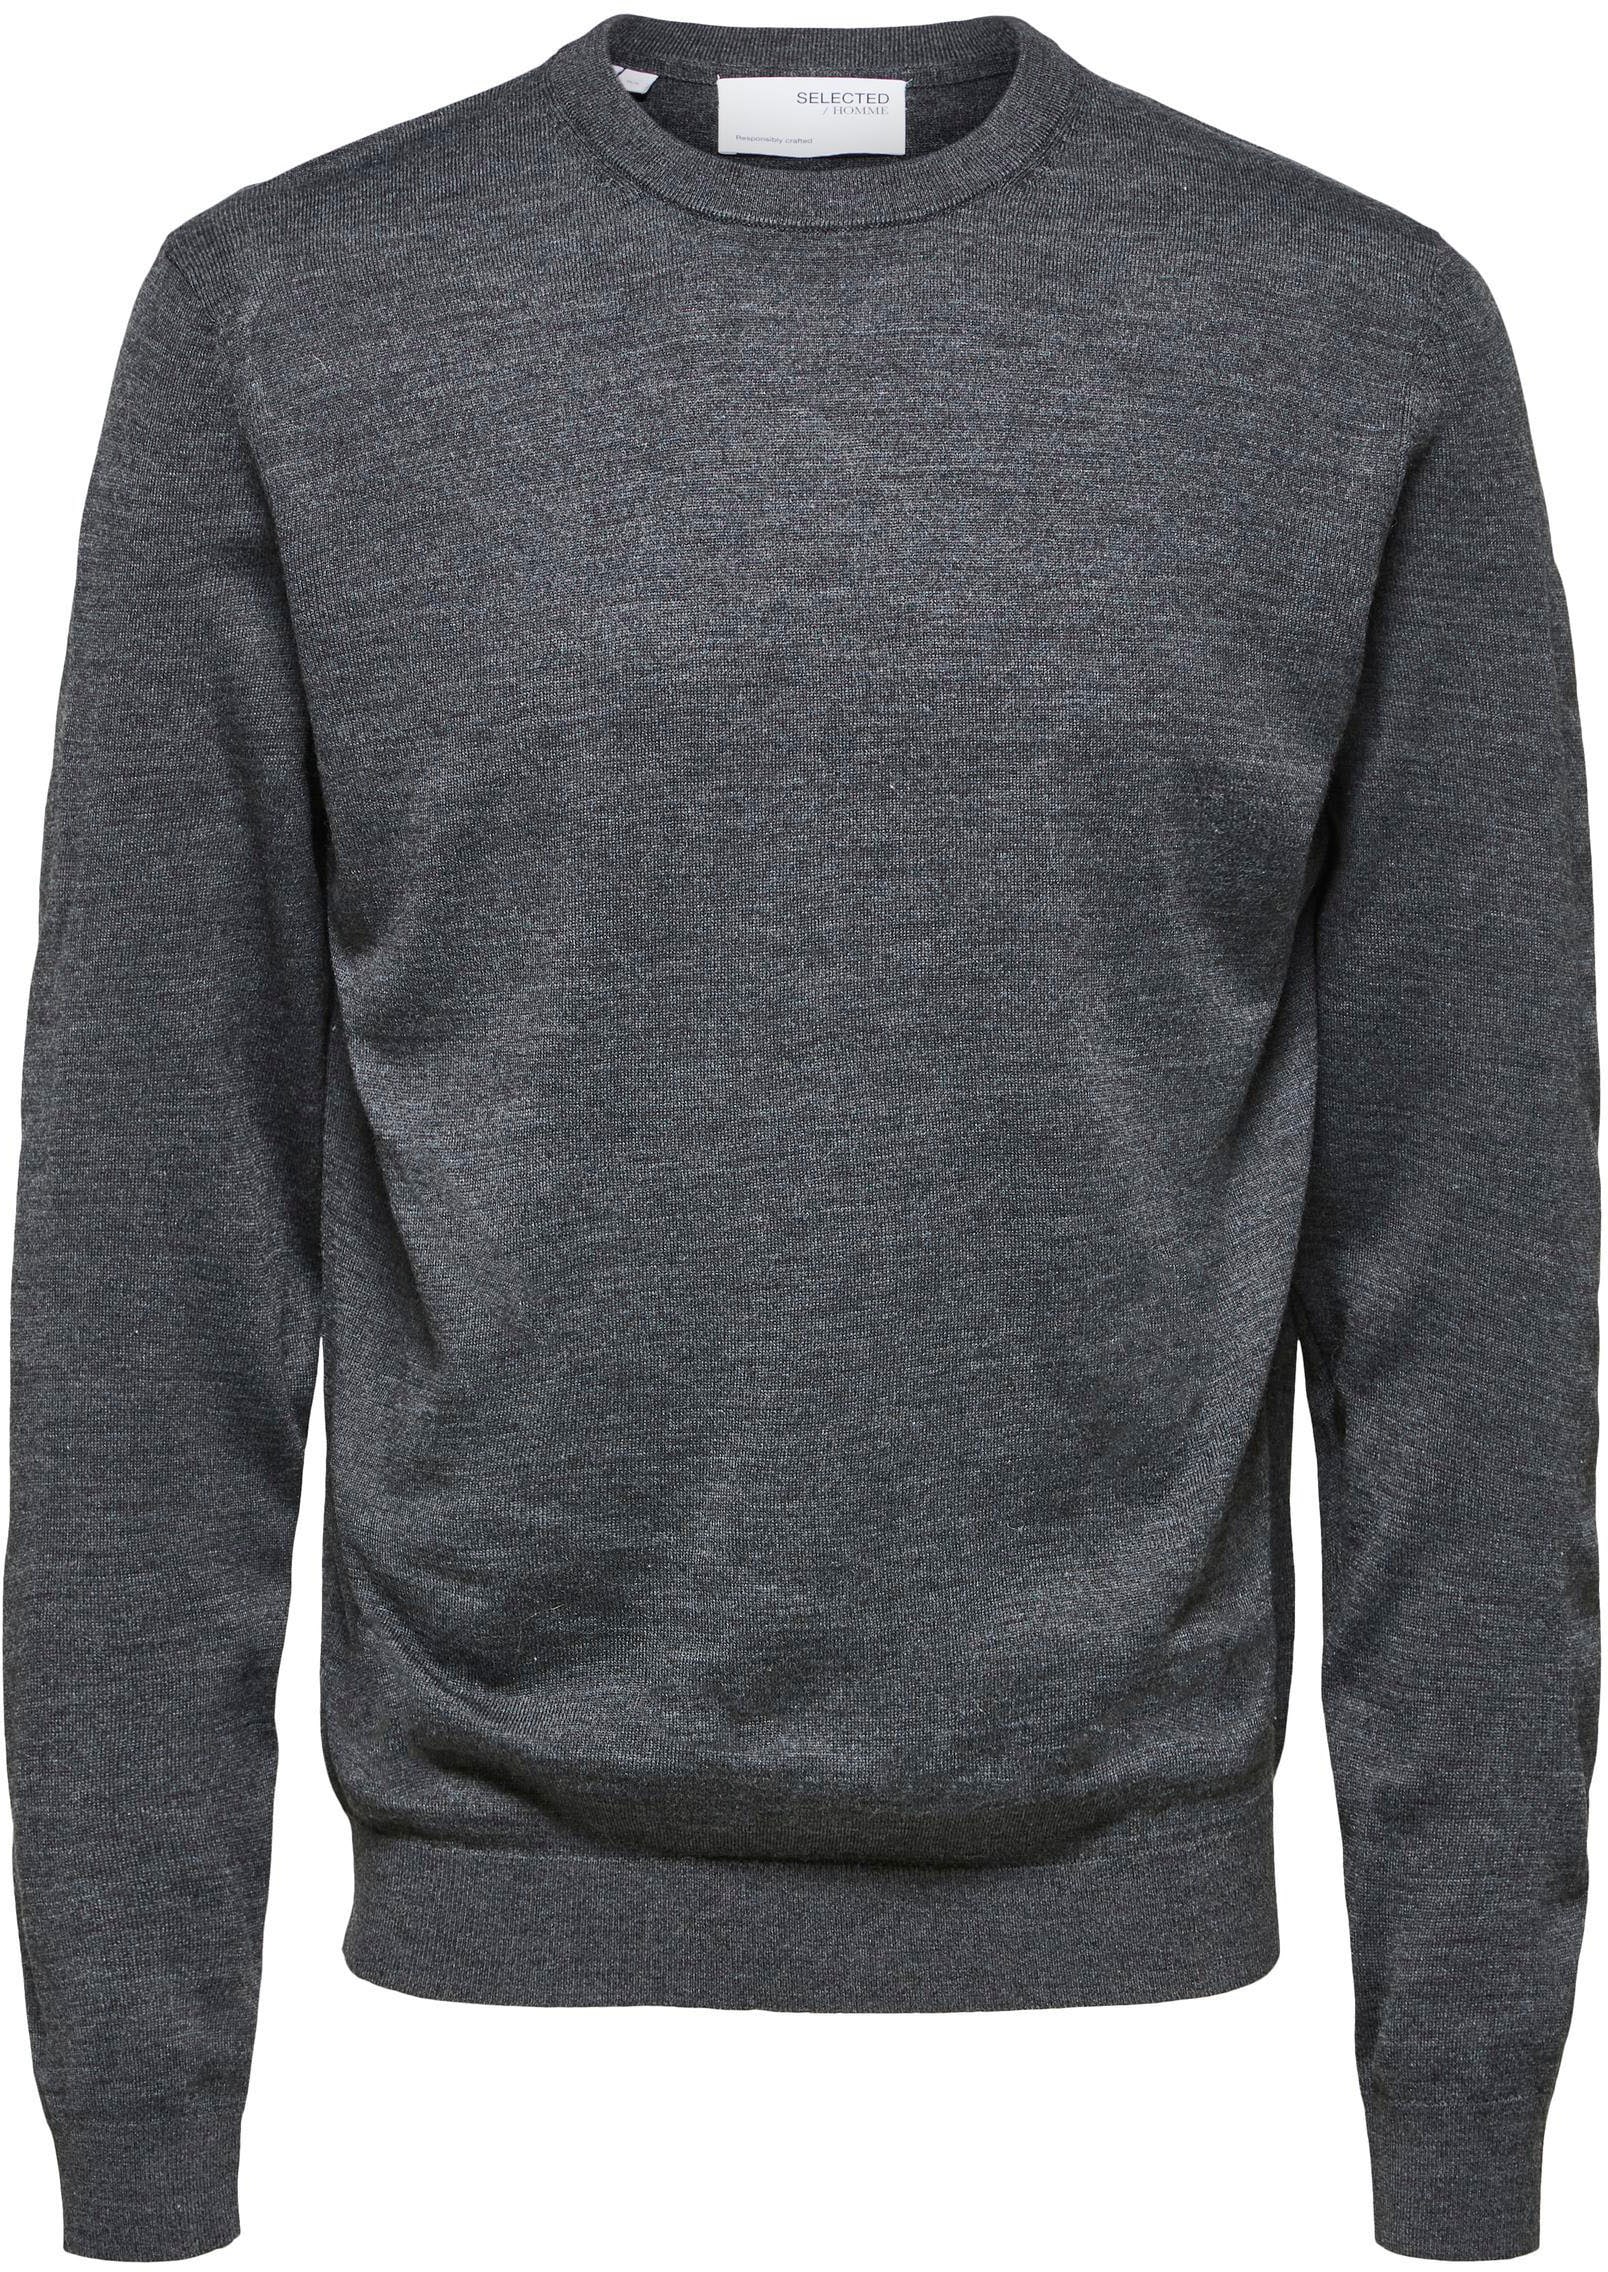 SELECTED HOMME Rundhalspullover »OWN MERINO COOLMAX KNIT« von SELECTED HOMME